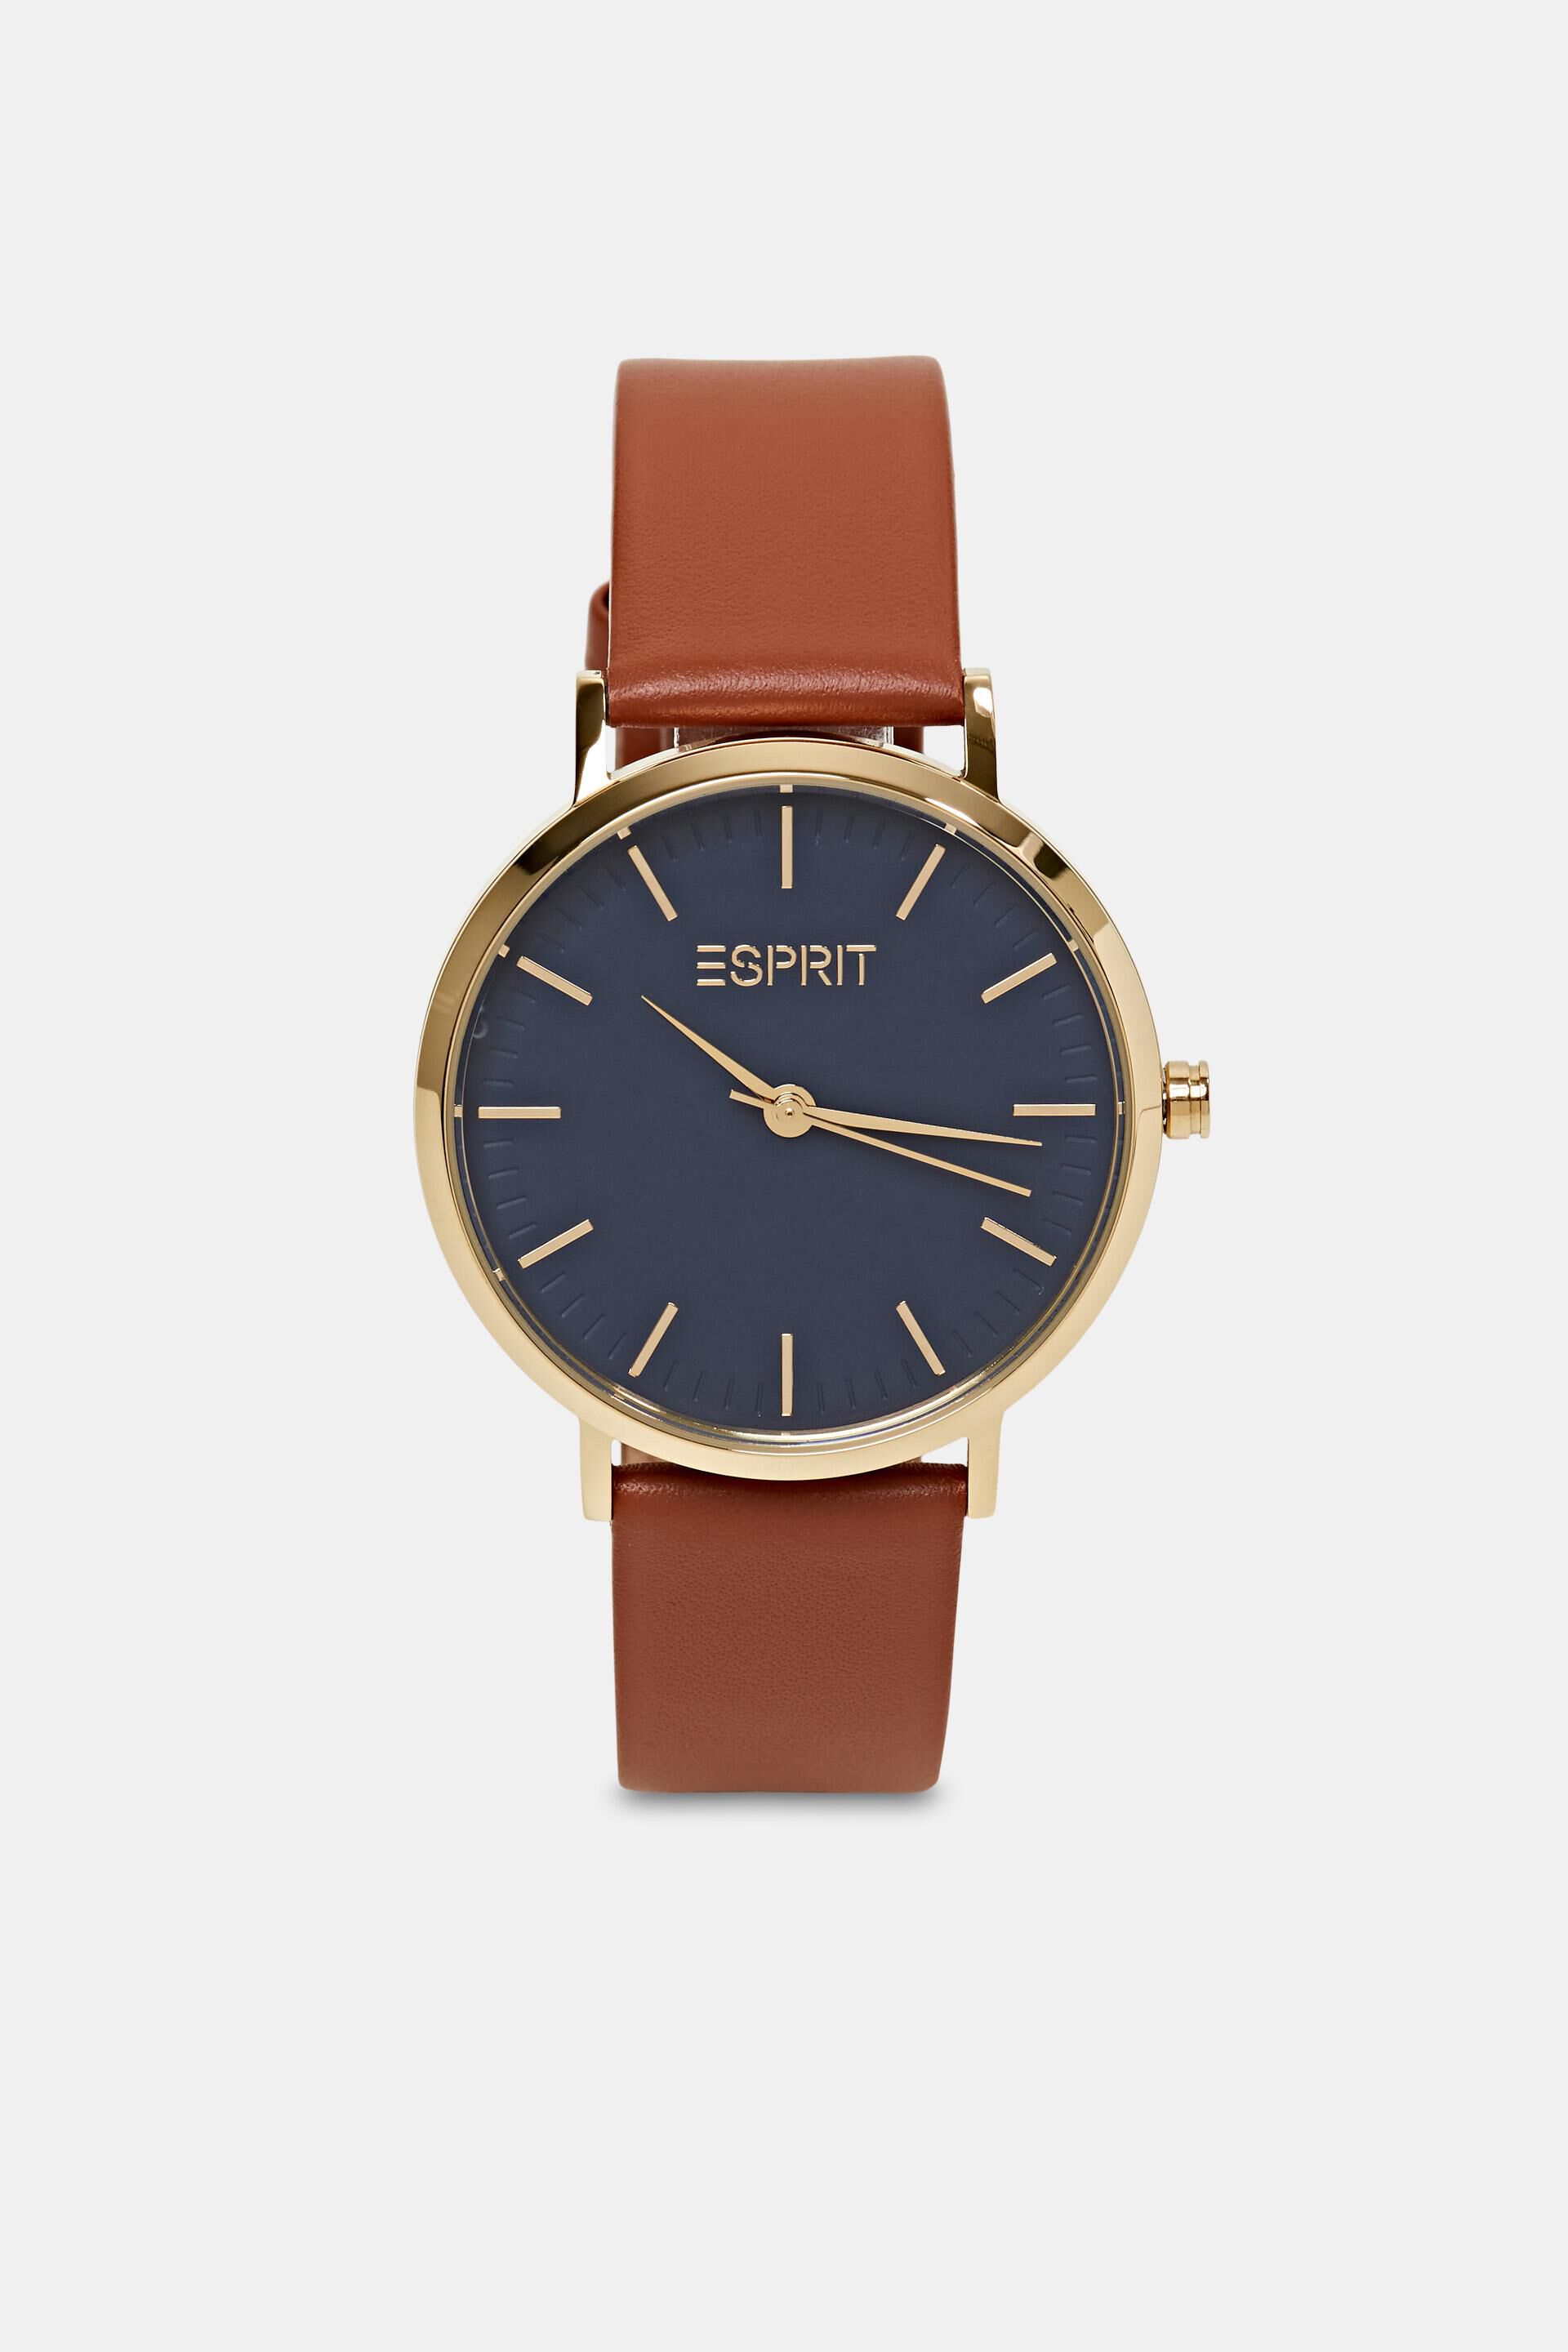 Esprit Stainless Watch Leather Gold-Tone Steel